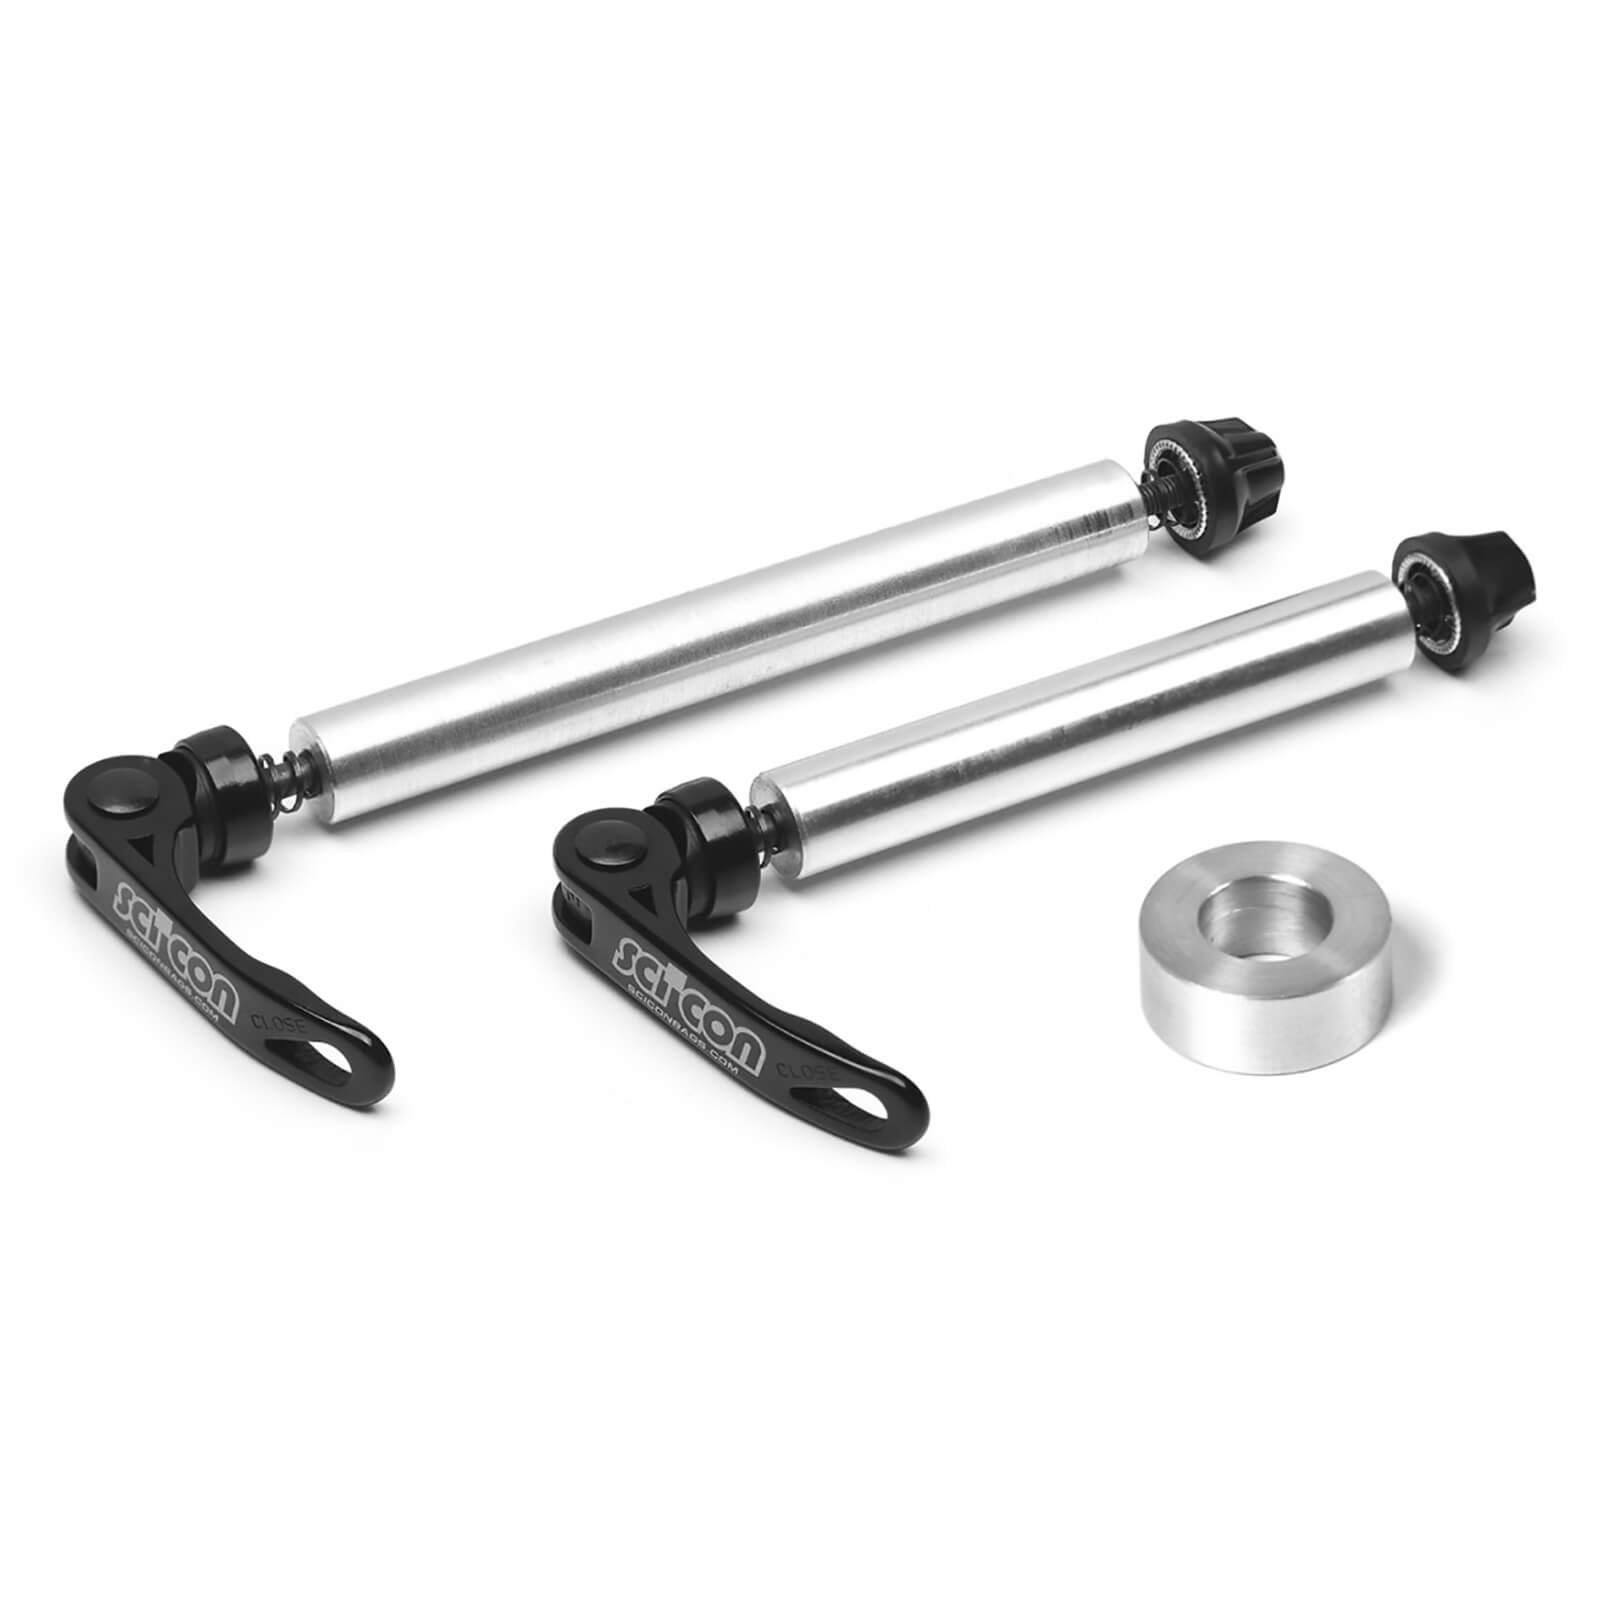 thru axle to quick release adapter